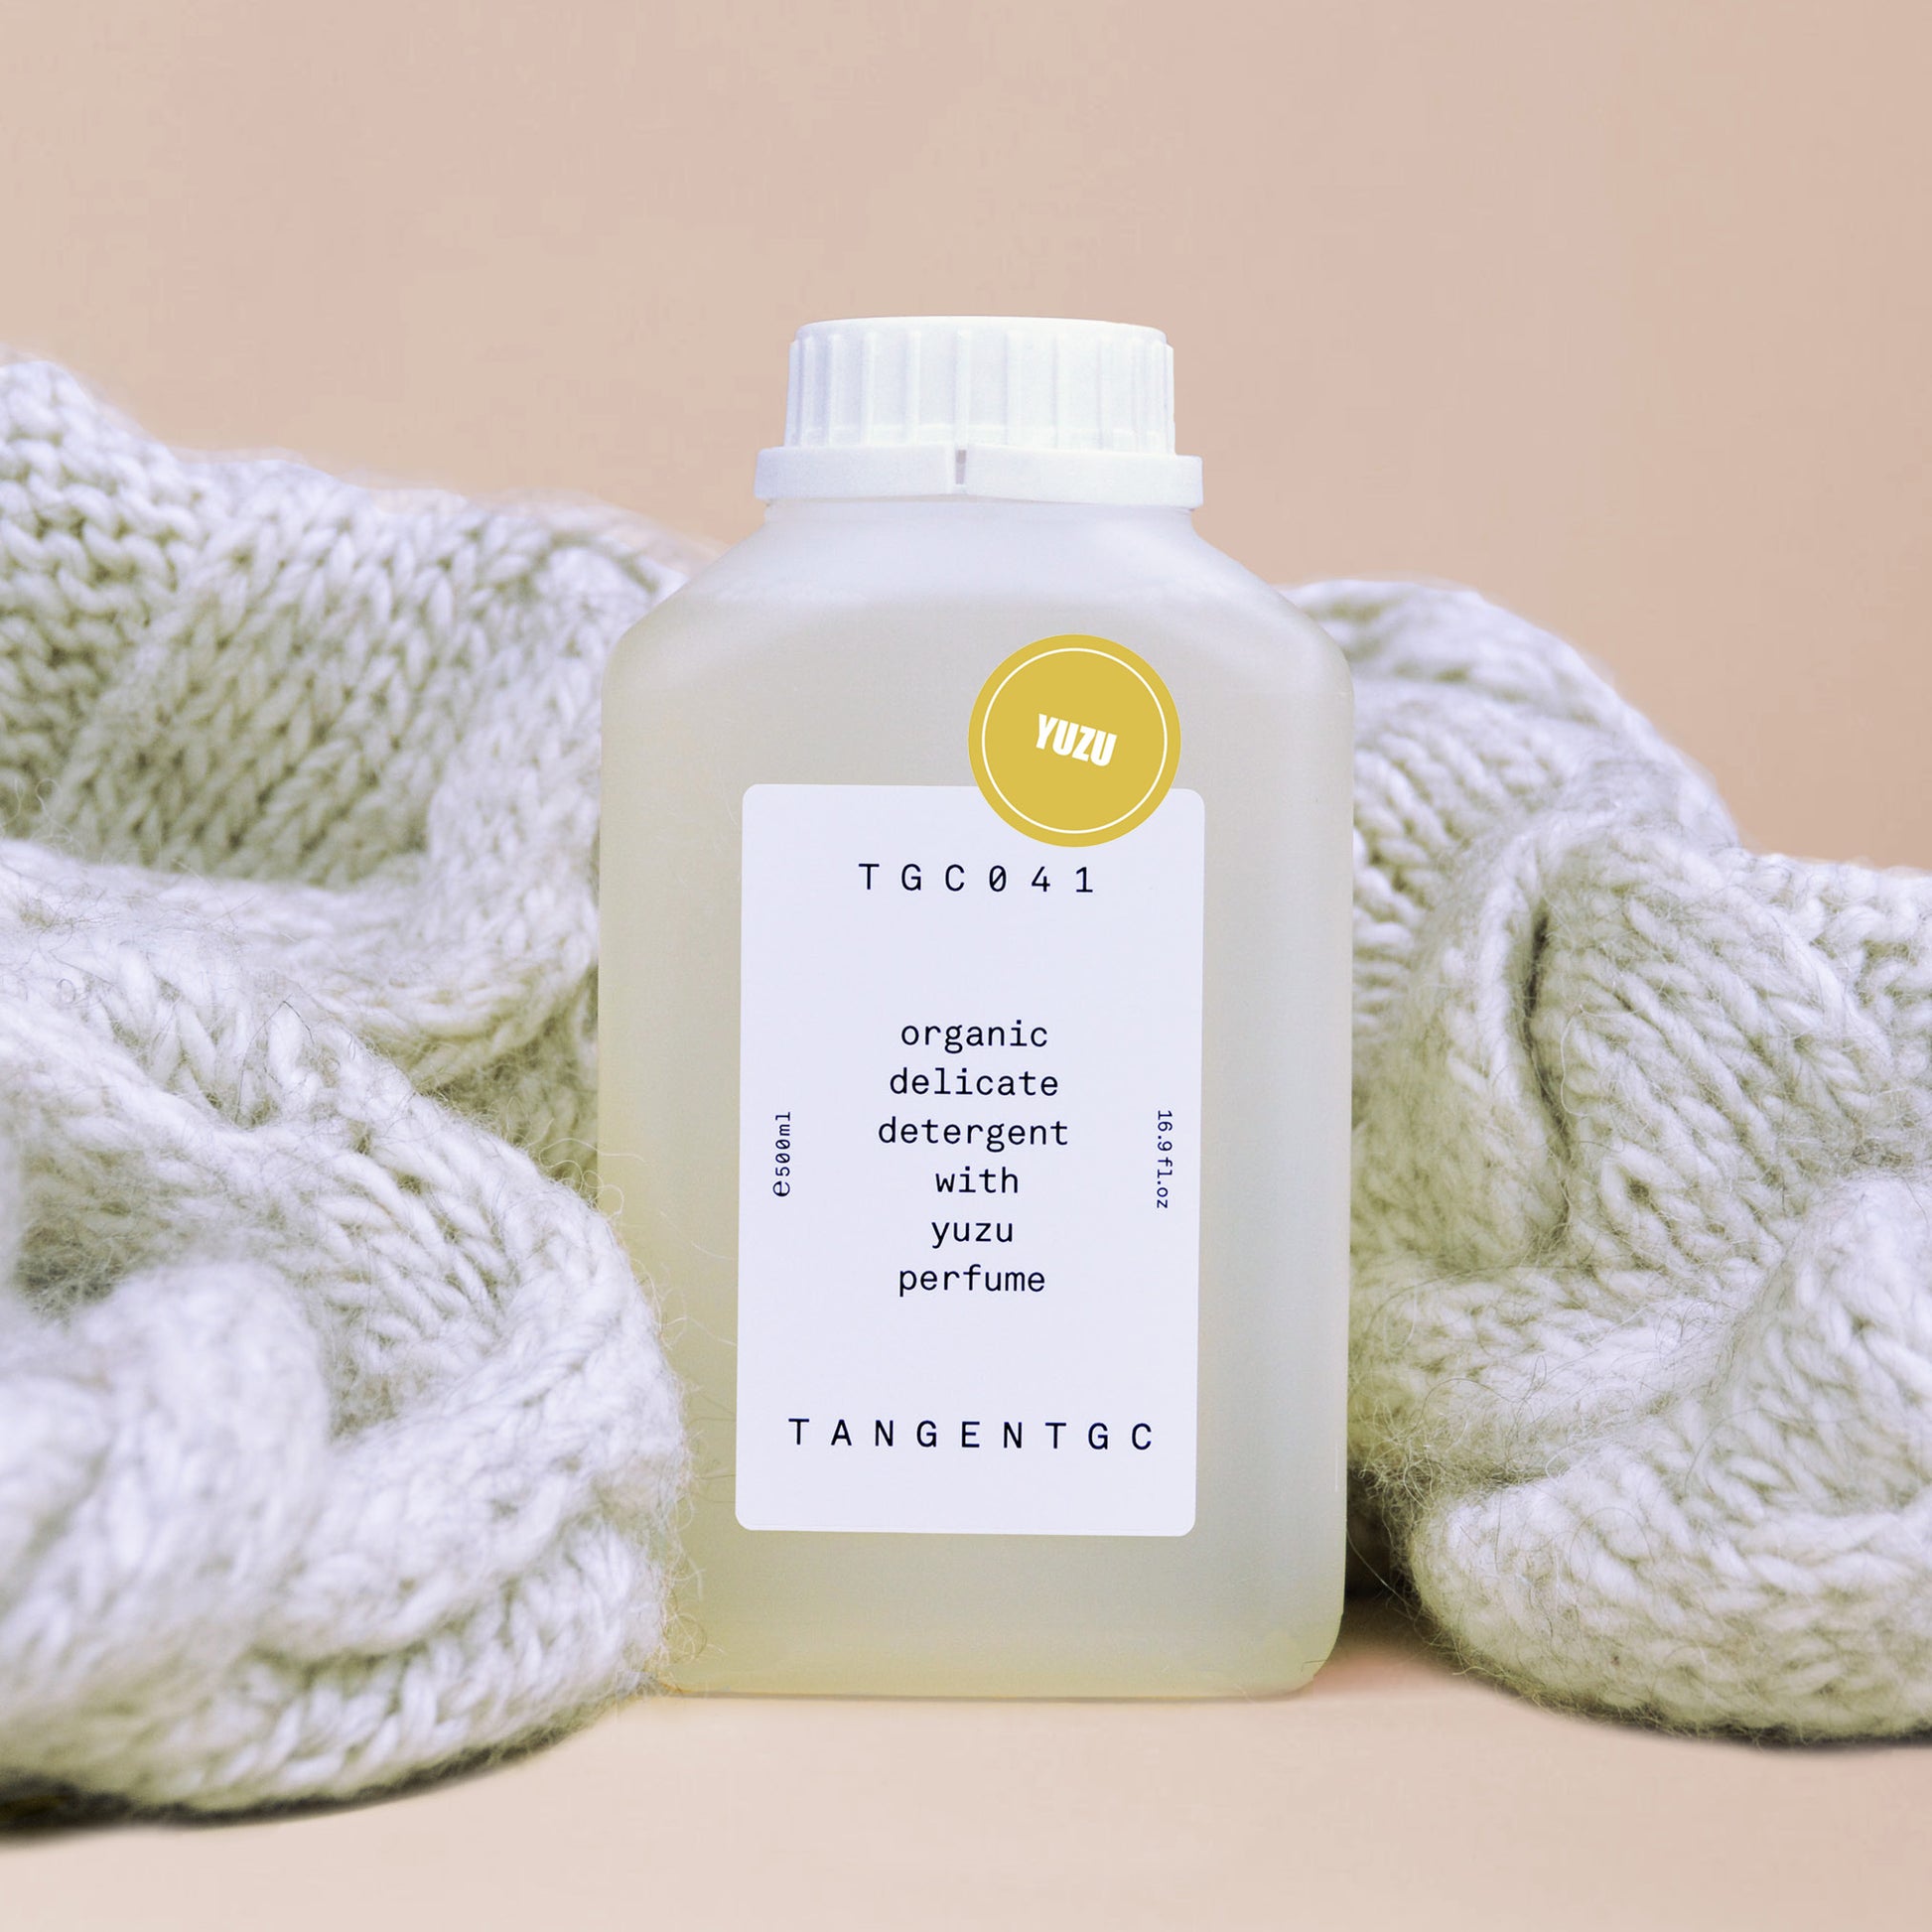 A  cream colored chunky wool sweater wrapped around a rectangular bottle of yuzu delicate detergent by Swedish brand Tangent Garment Care